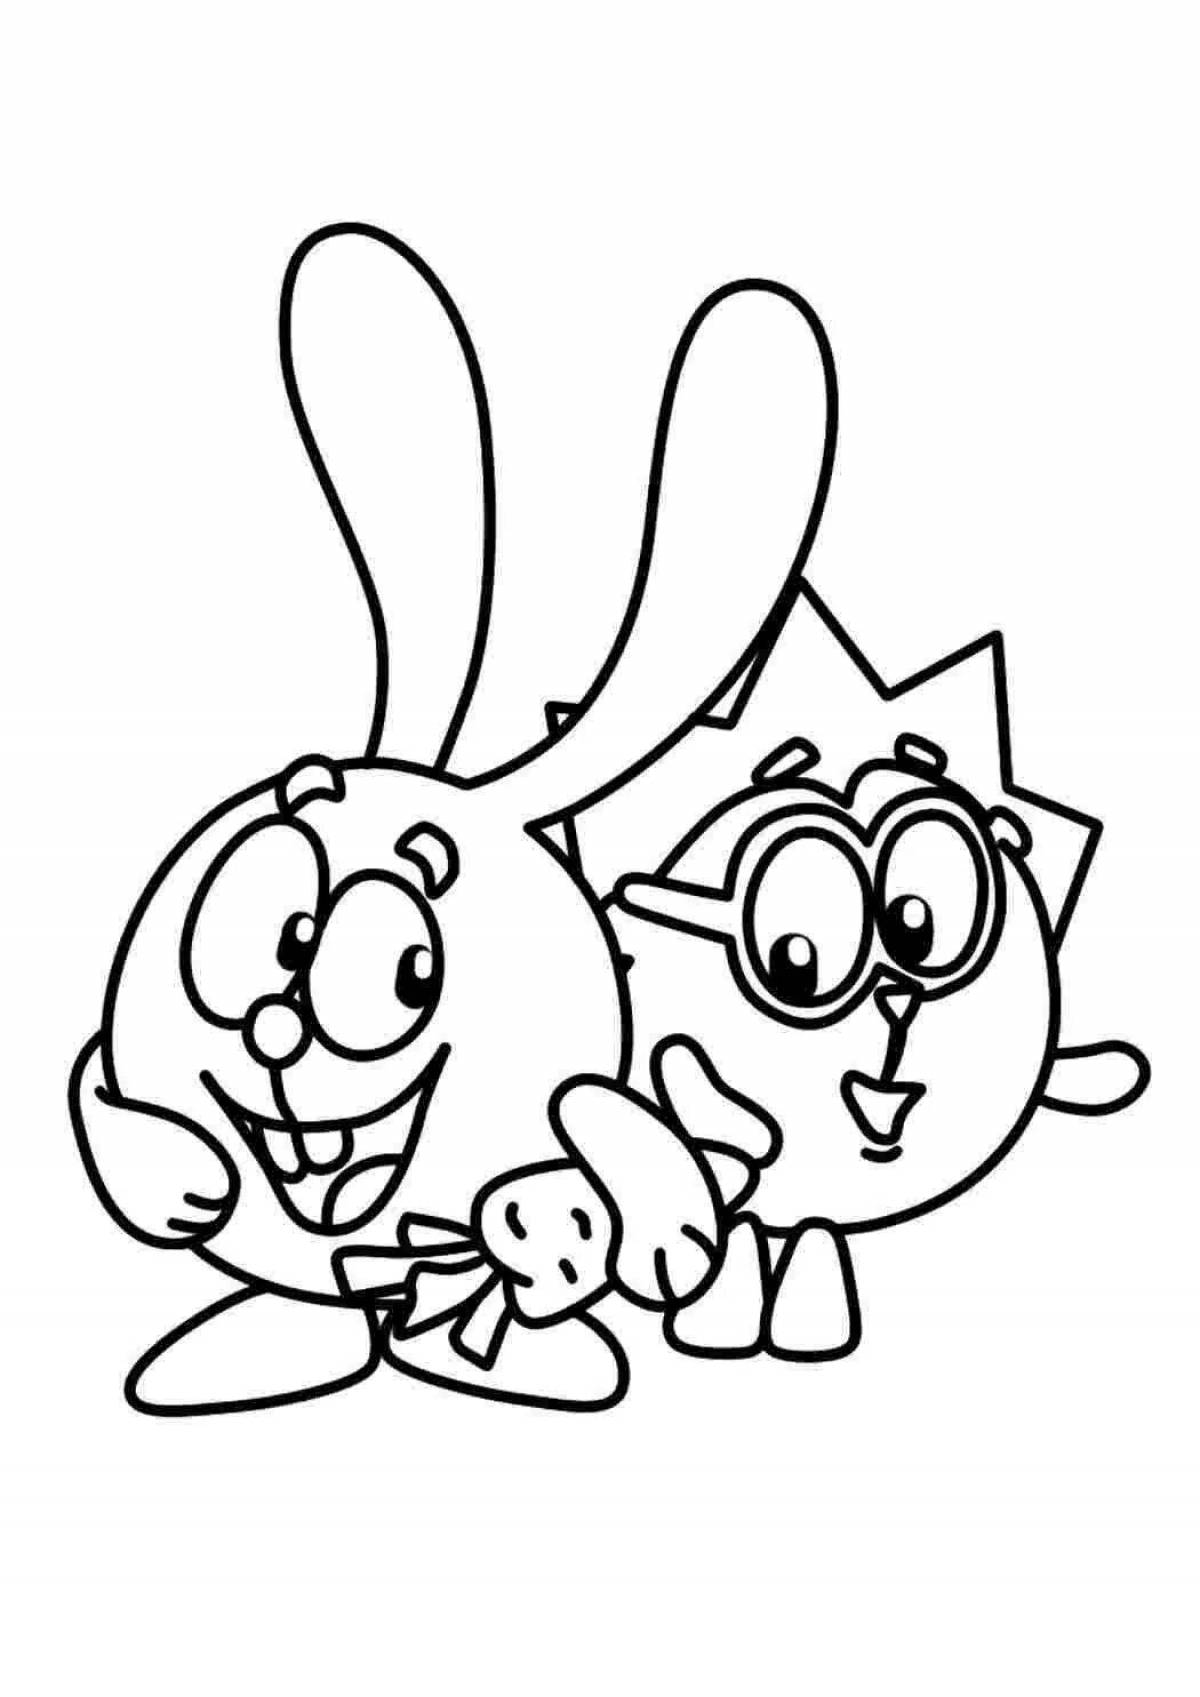 Fun black and white coloring book for kids